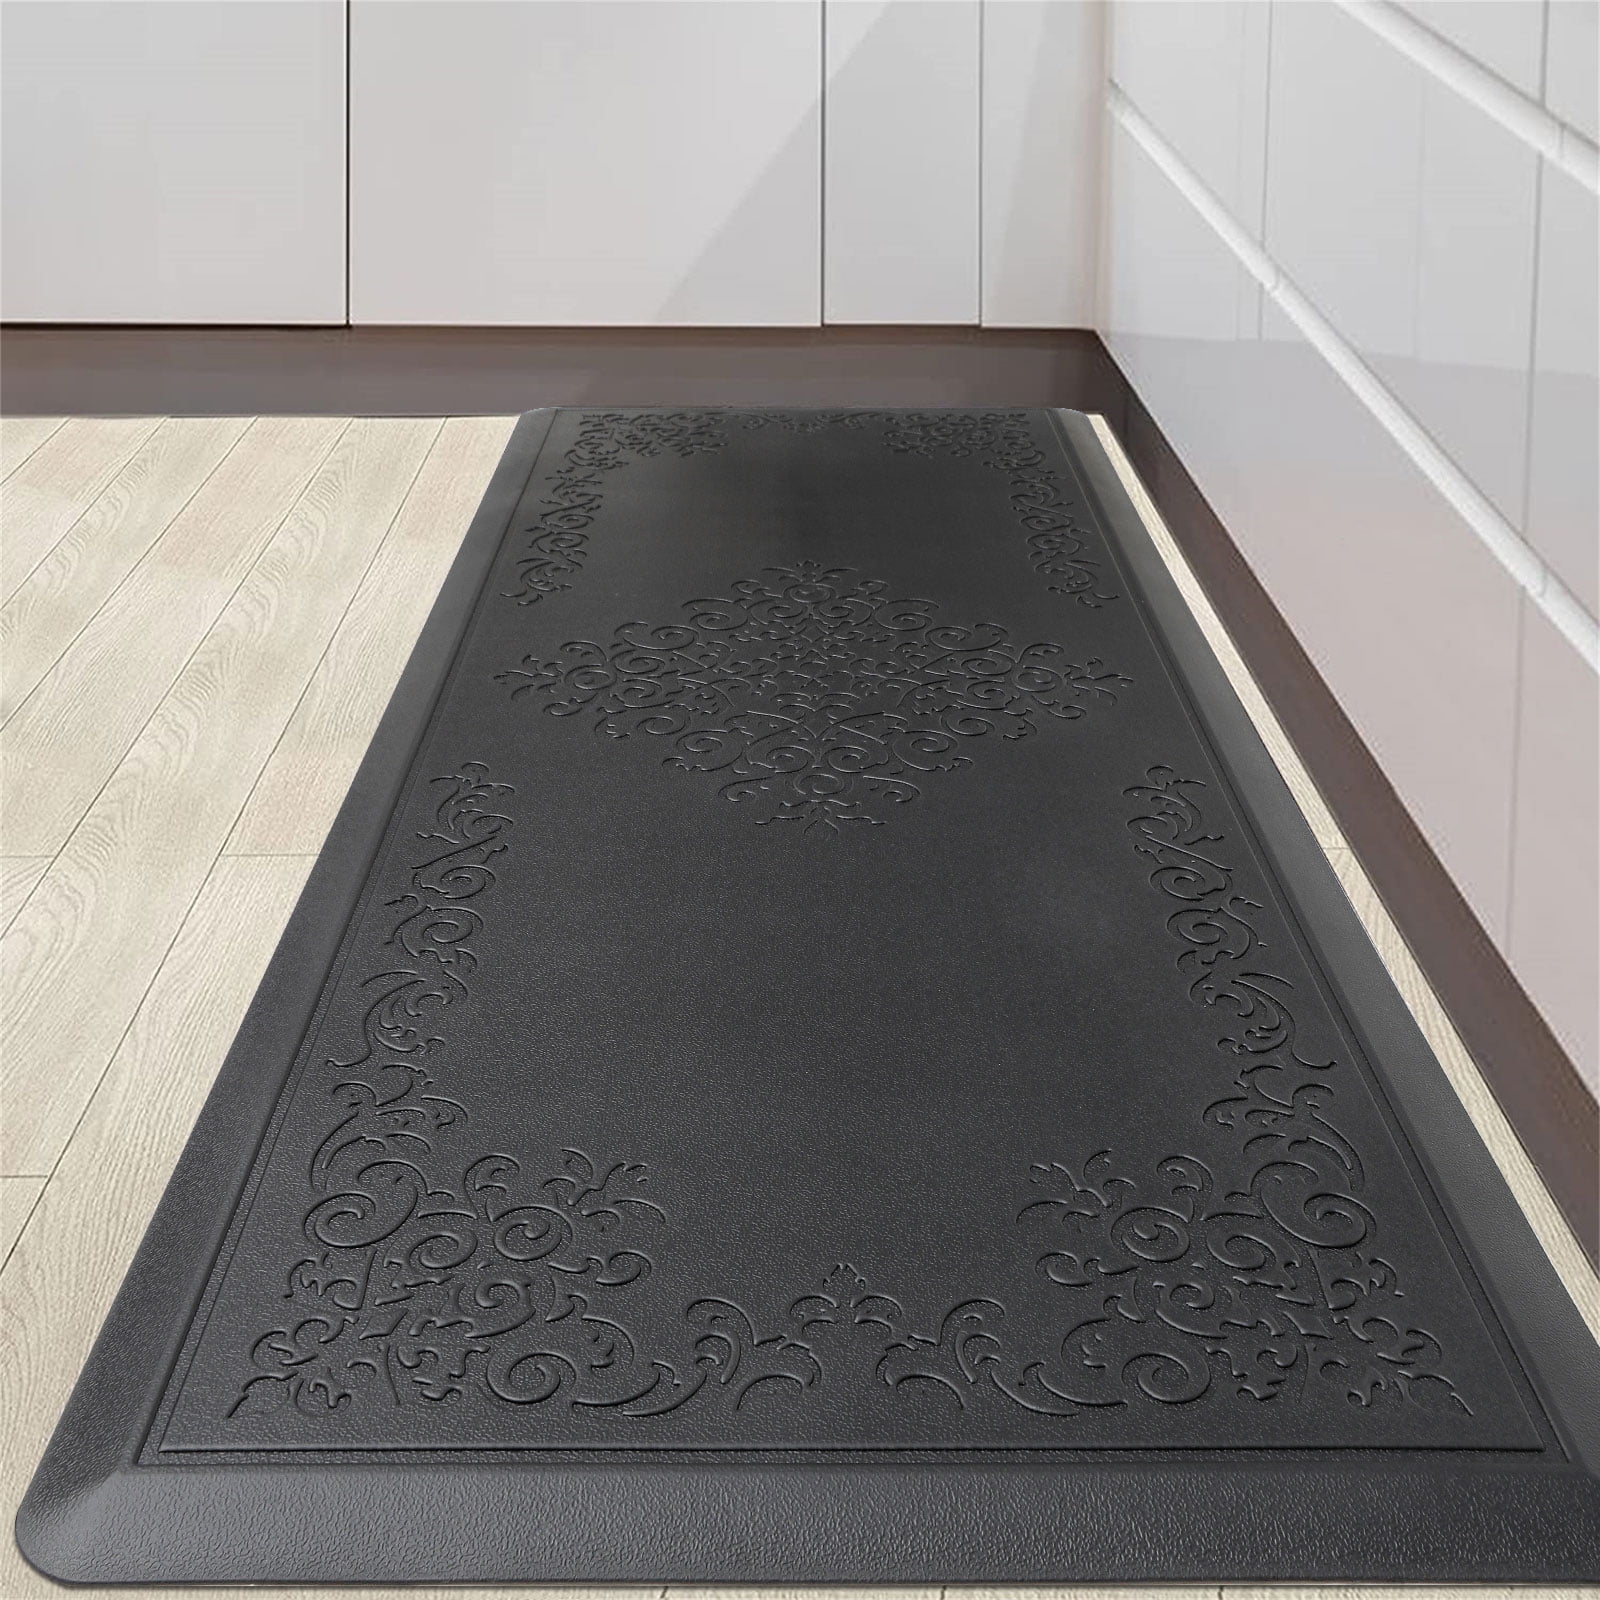 Ileading Kitchen Mat Cushioned Anti Fatigue Floor Mat,Thick Non Slip  Waterproof Kitchen Rugs and Mats,Heavy Duty Foam Standing Mat for Kitchen, Floor,Office,Desk,Sink,Laundry (20 x 60) 